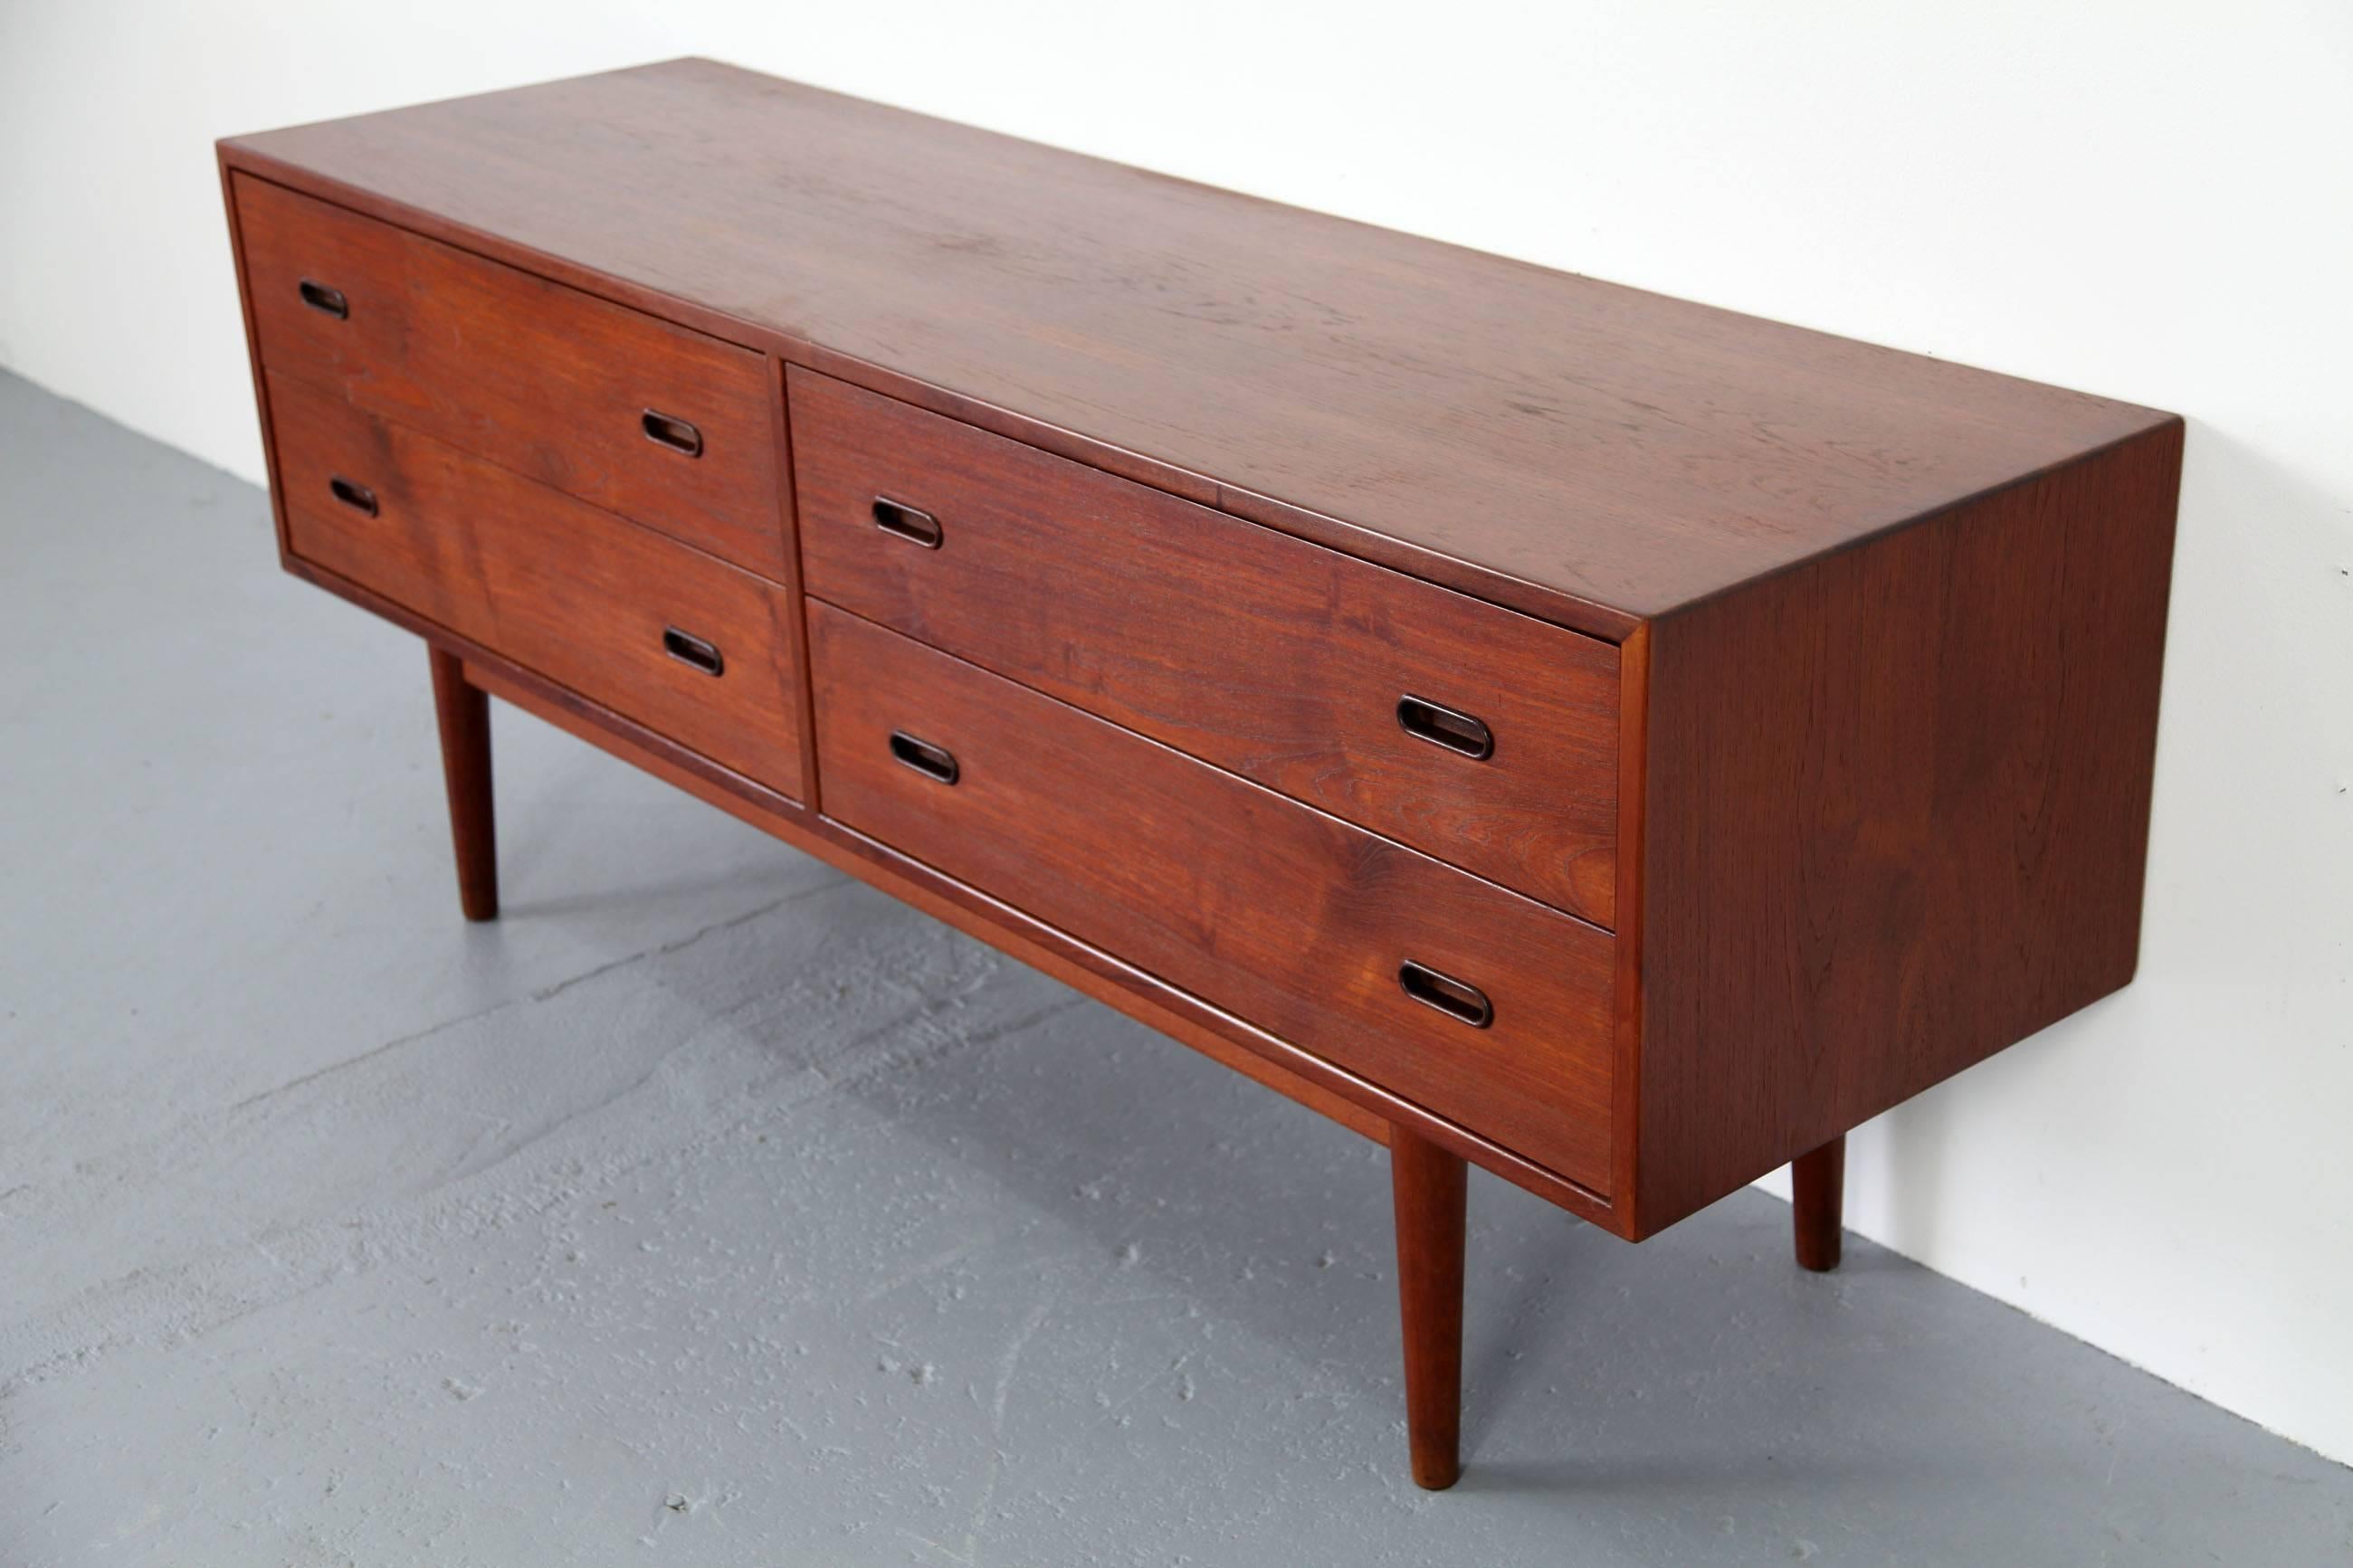 Teak Rare Chest of Drawers by Arne Vodder, Produced by Sibast